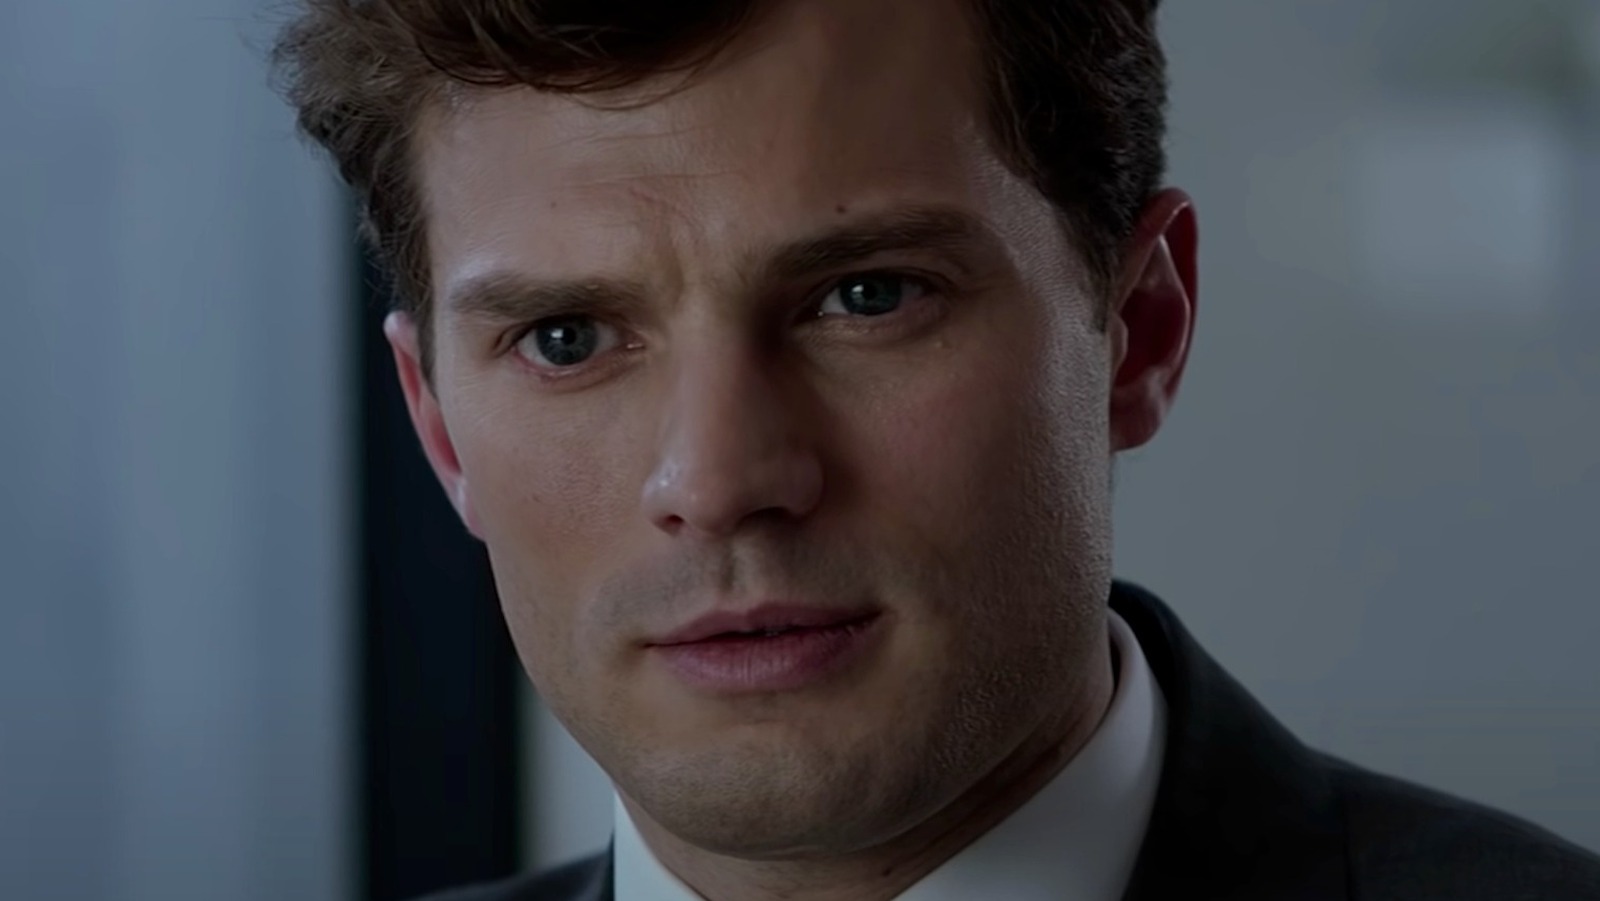 20 Steamy Movies Like Fifty Shades Of Grey pic